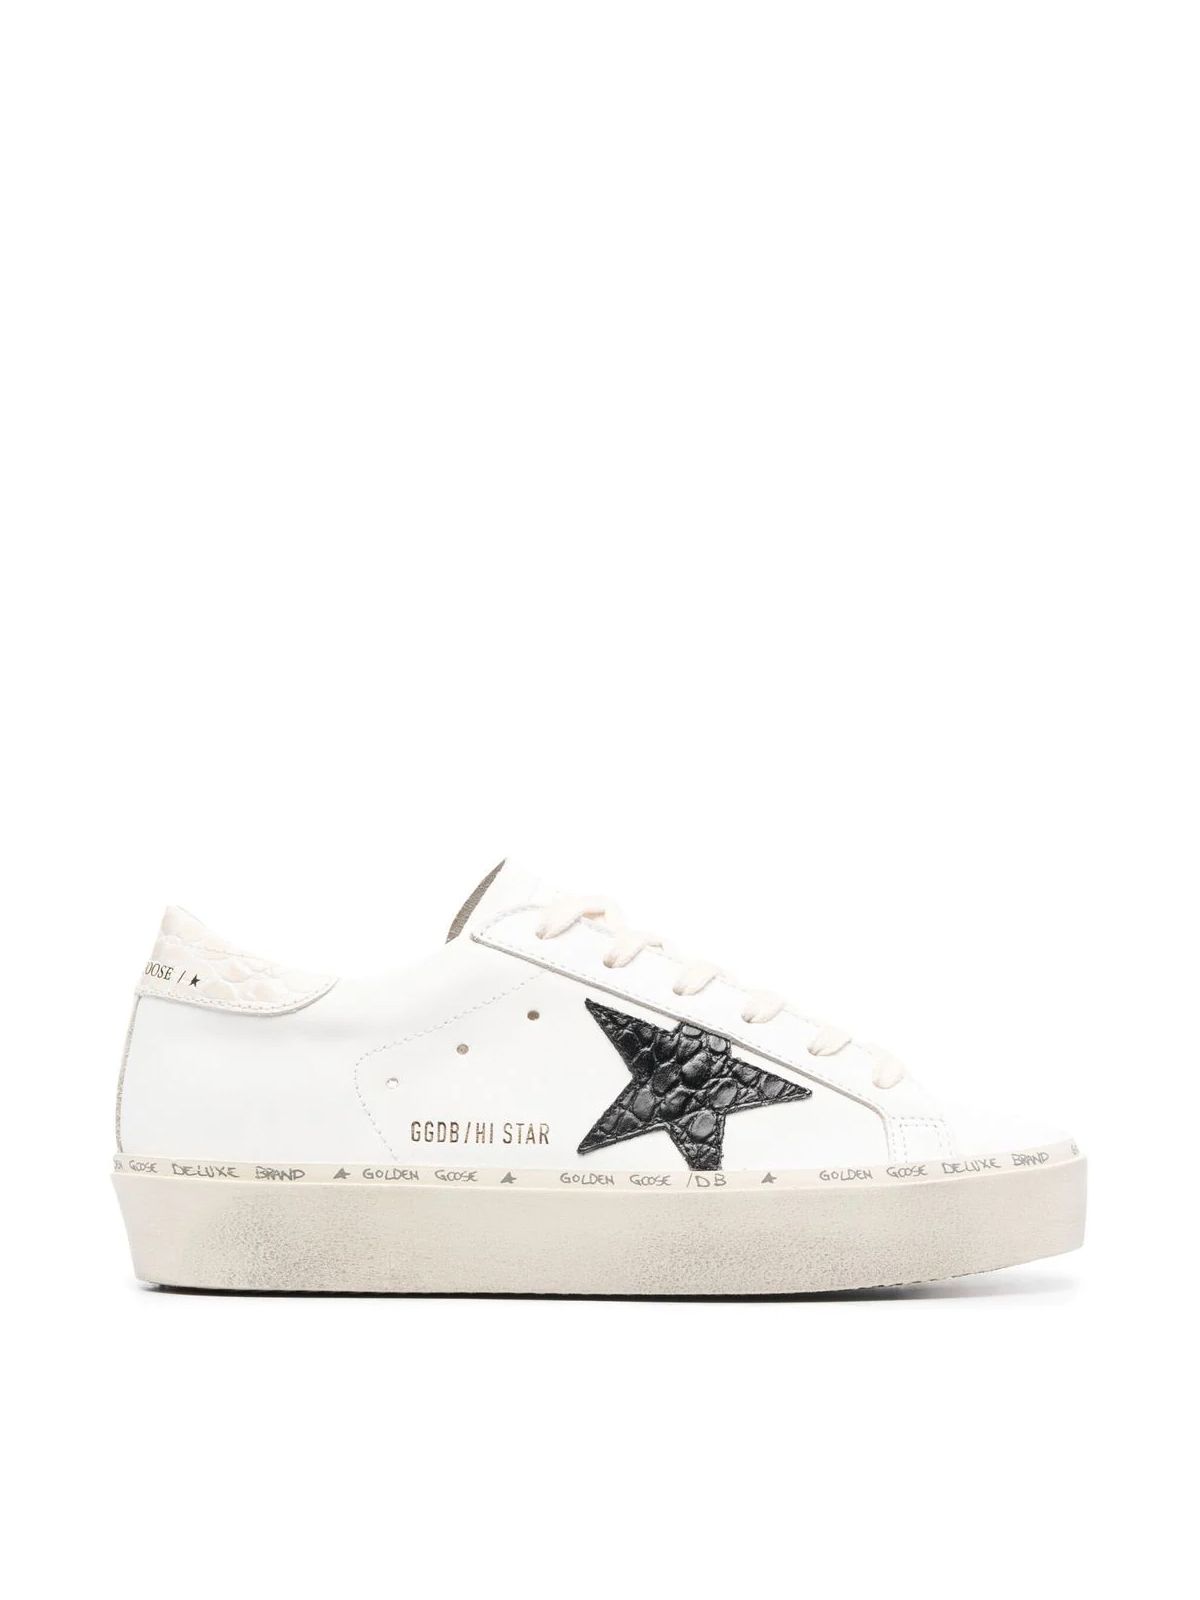 Golden Goose Hi Star Leather Upper Cocco Printed Leather Star And Heel In White Black Ivory